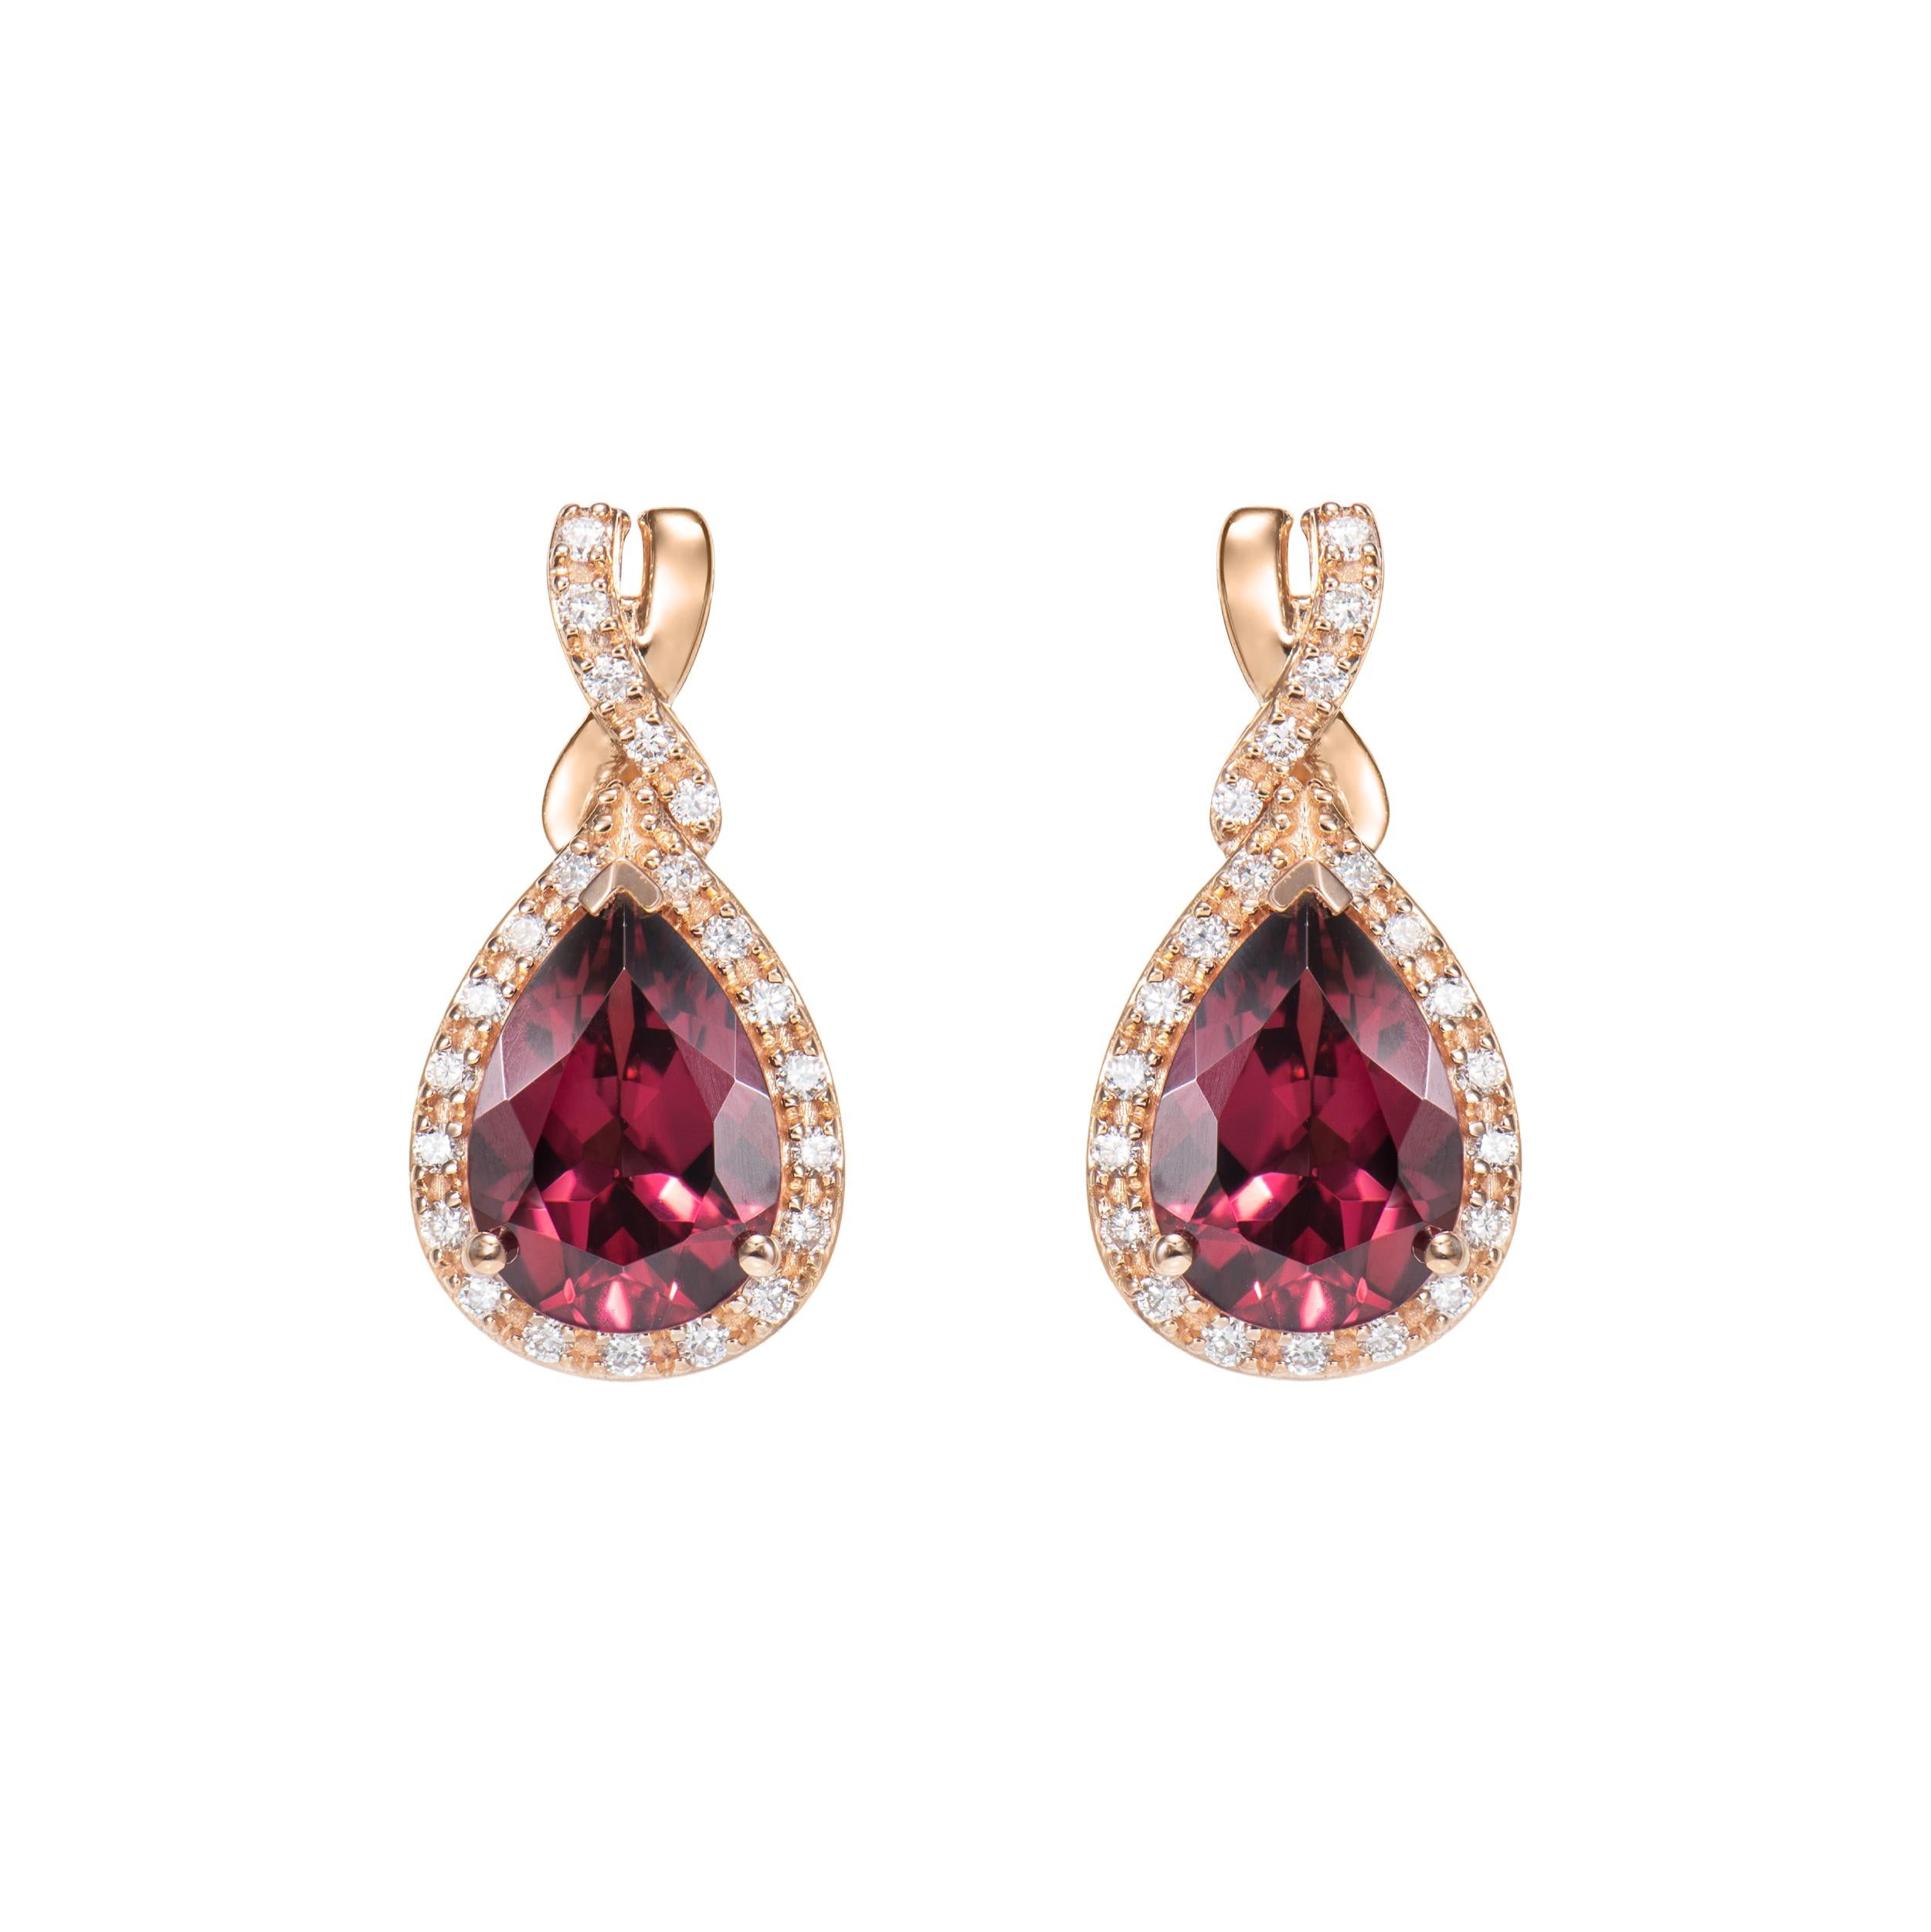 Contemporary 4.71 Carat Rhodolite Drop Earring in 18 Karat Rose Gold with White Diamond For Sale